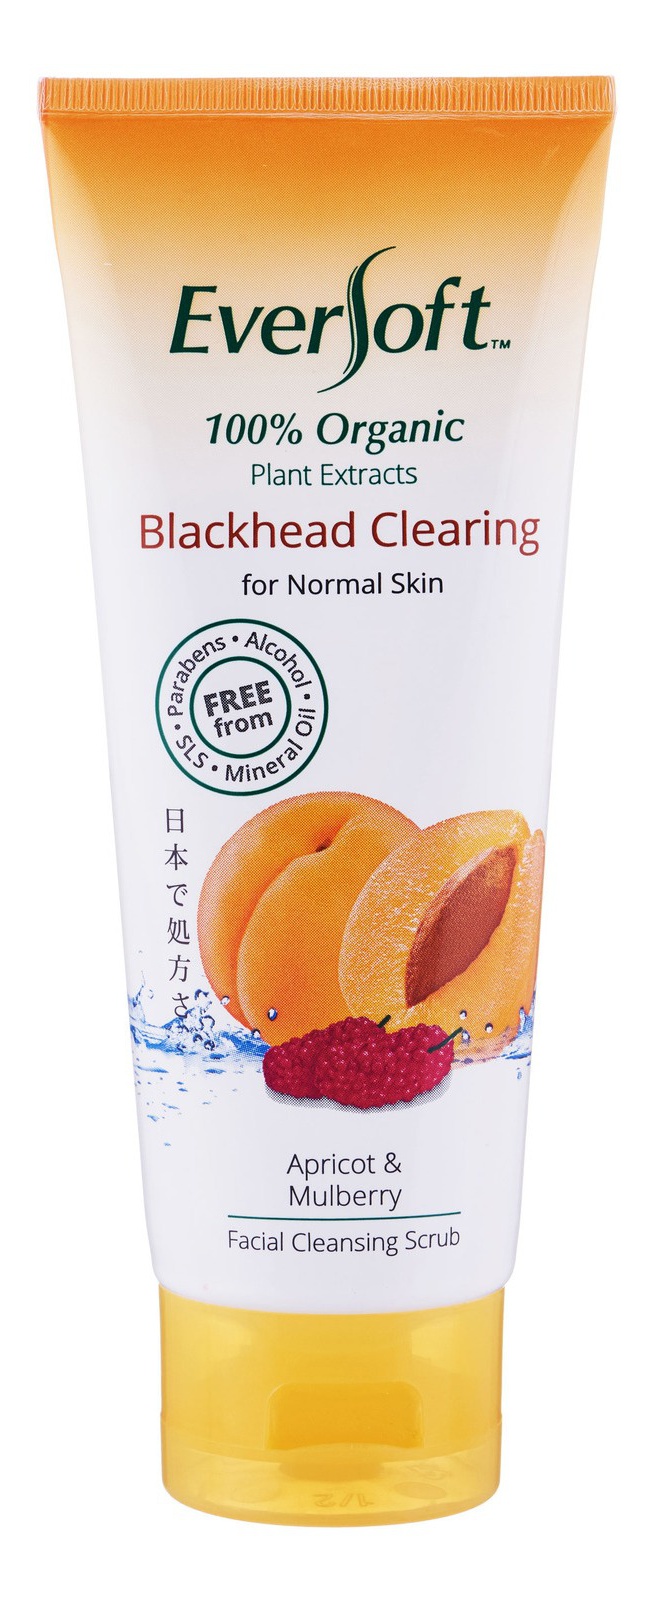 Eversoft Blackhead Clearing